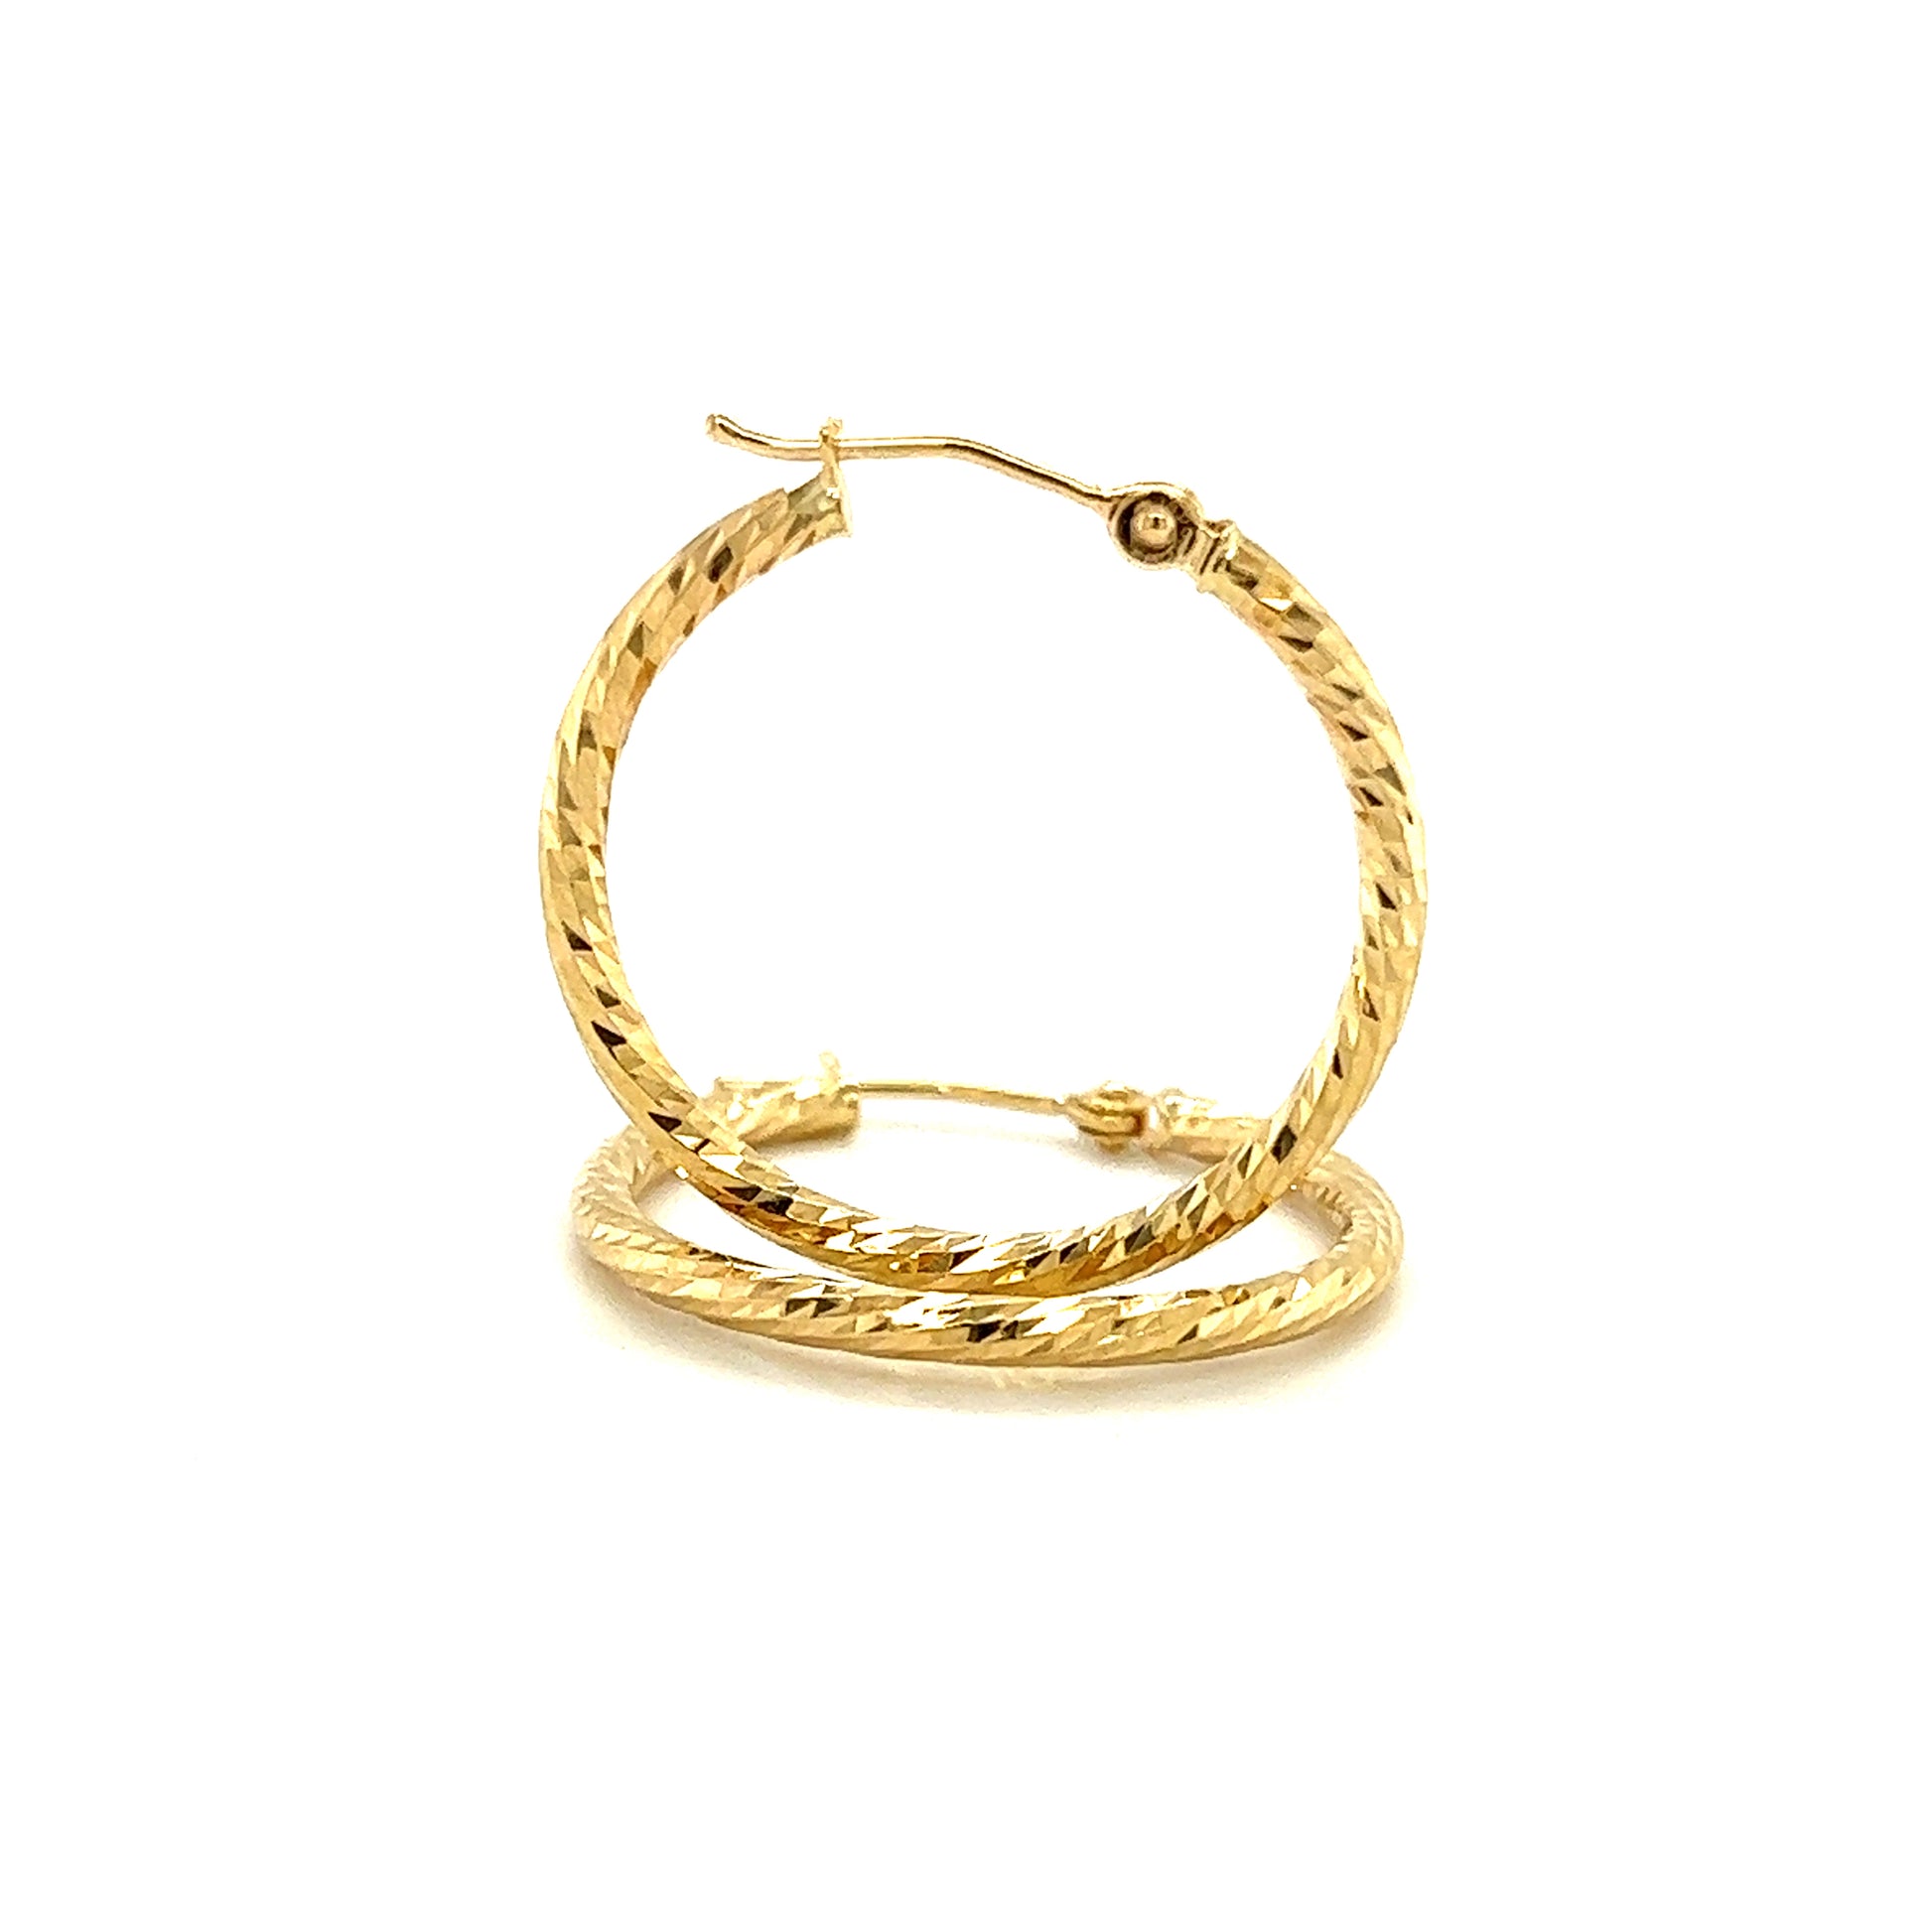 Round Hoop 25.5mm Earrings with Diamond-cut Finish in 14K Yellow Gold